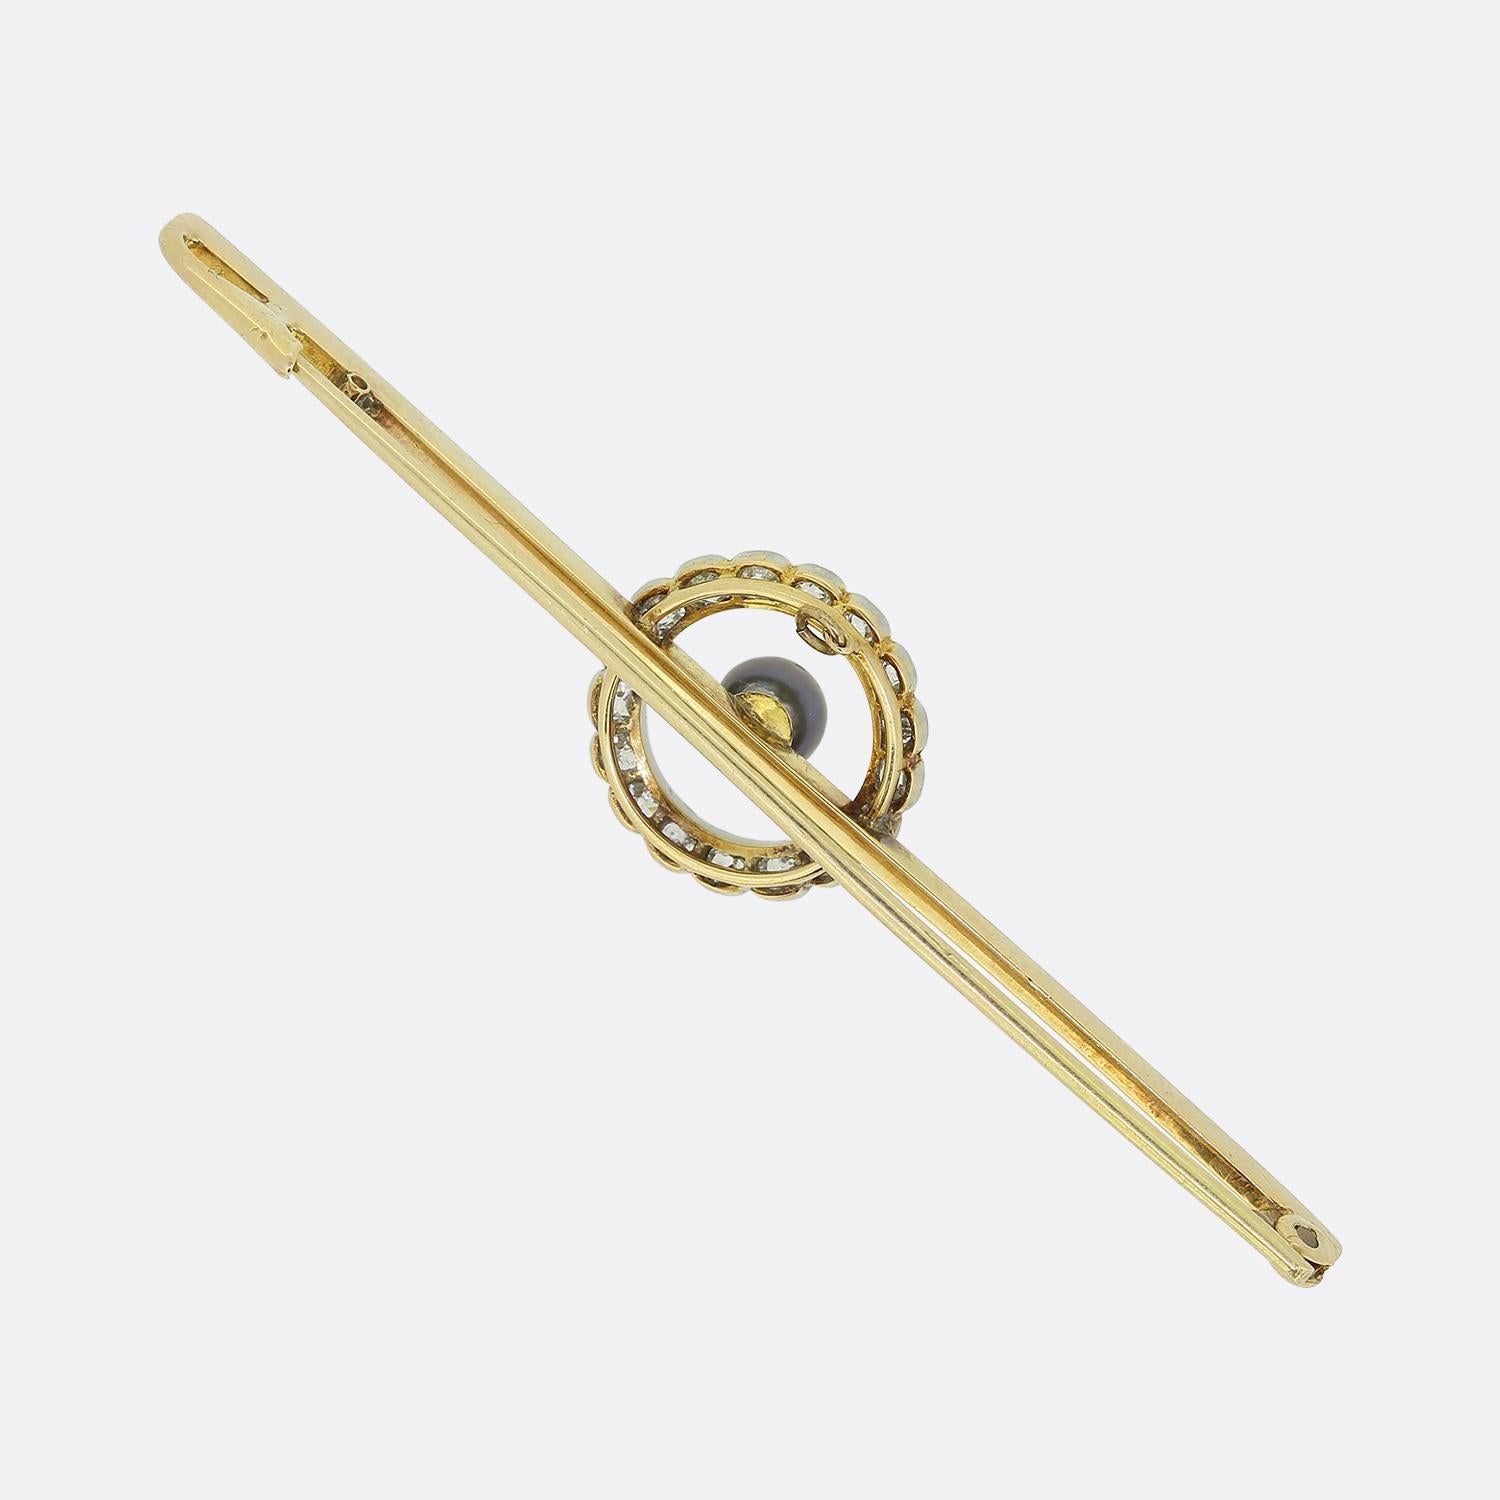 Here we have a charming bar brooch dating back to the Edwardian era. The bar itself has been crafted from 18ct yellow gold and tipped in platinum. The circular motif at the centre has been set with a row of round faceted old mine cut diamonds around